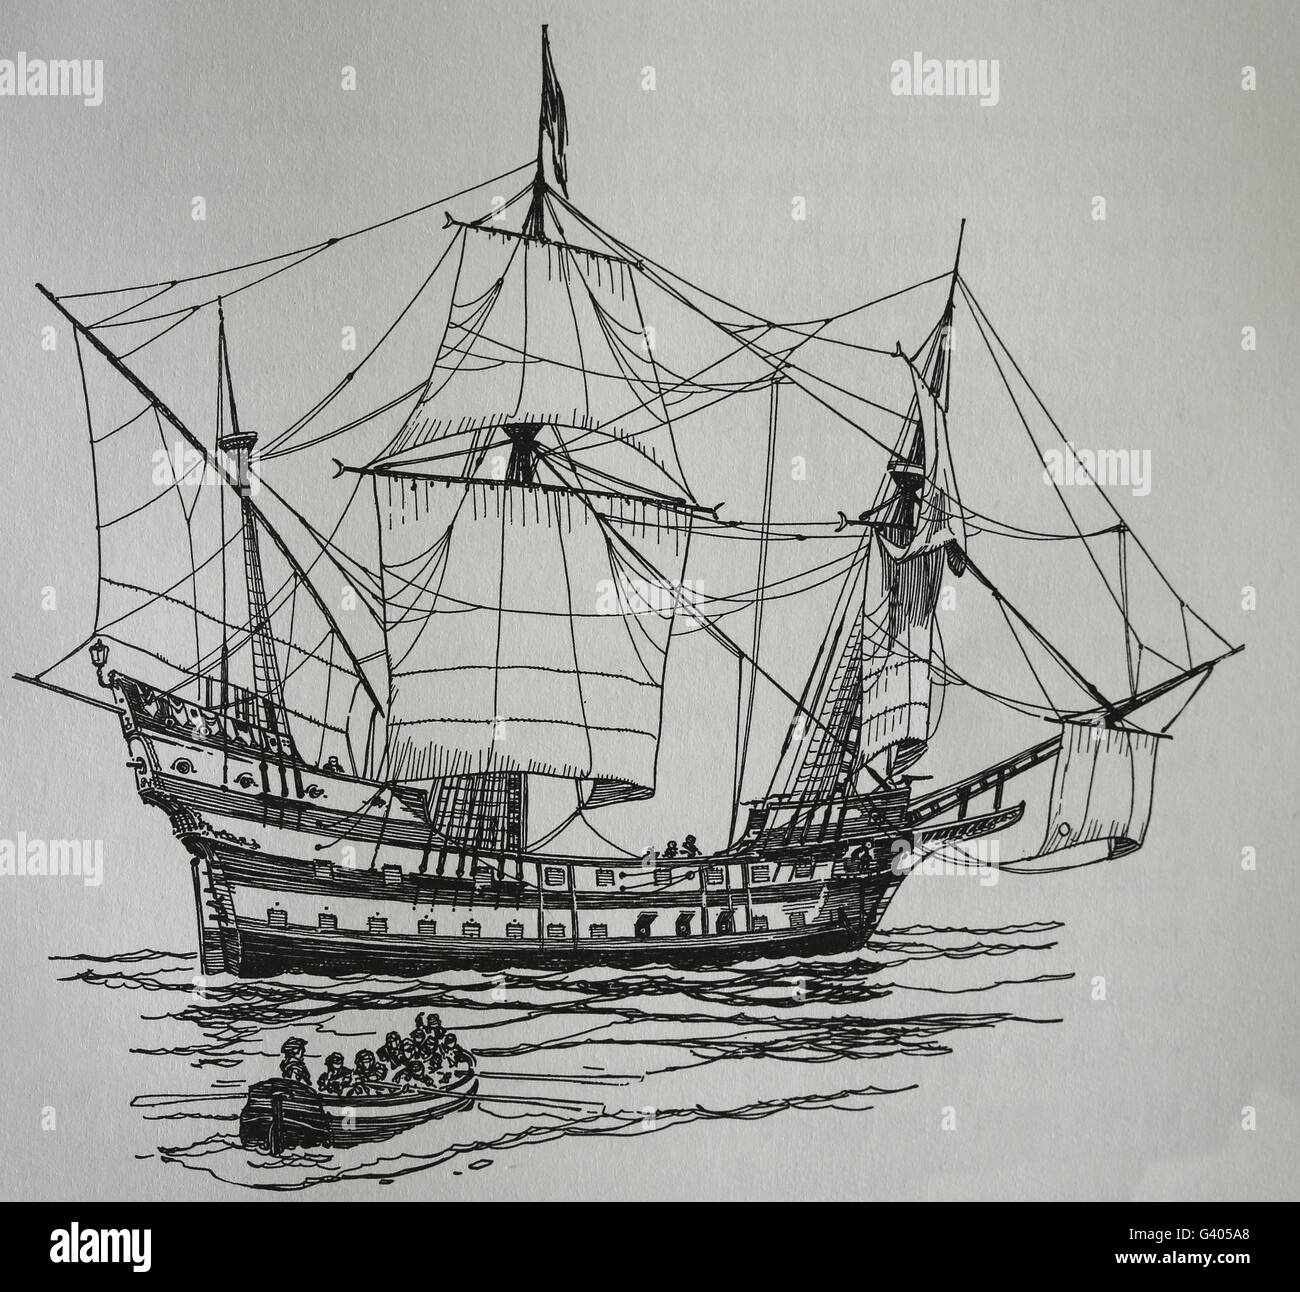 The Galleon. Sailing ship. Modern Age. 16th-17th century. Engraving. Stock Photo